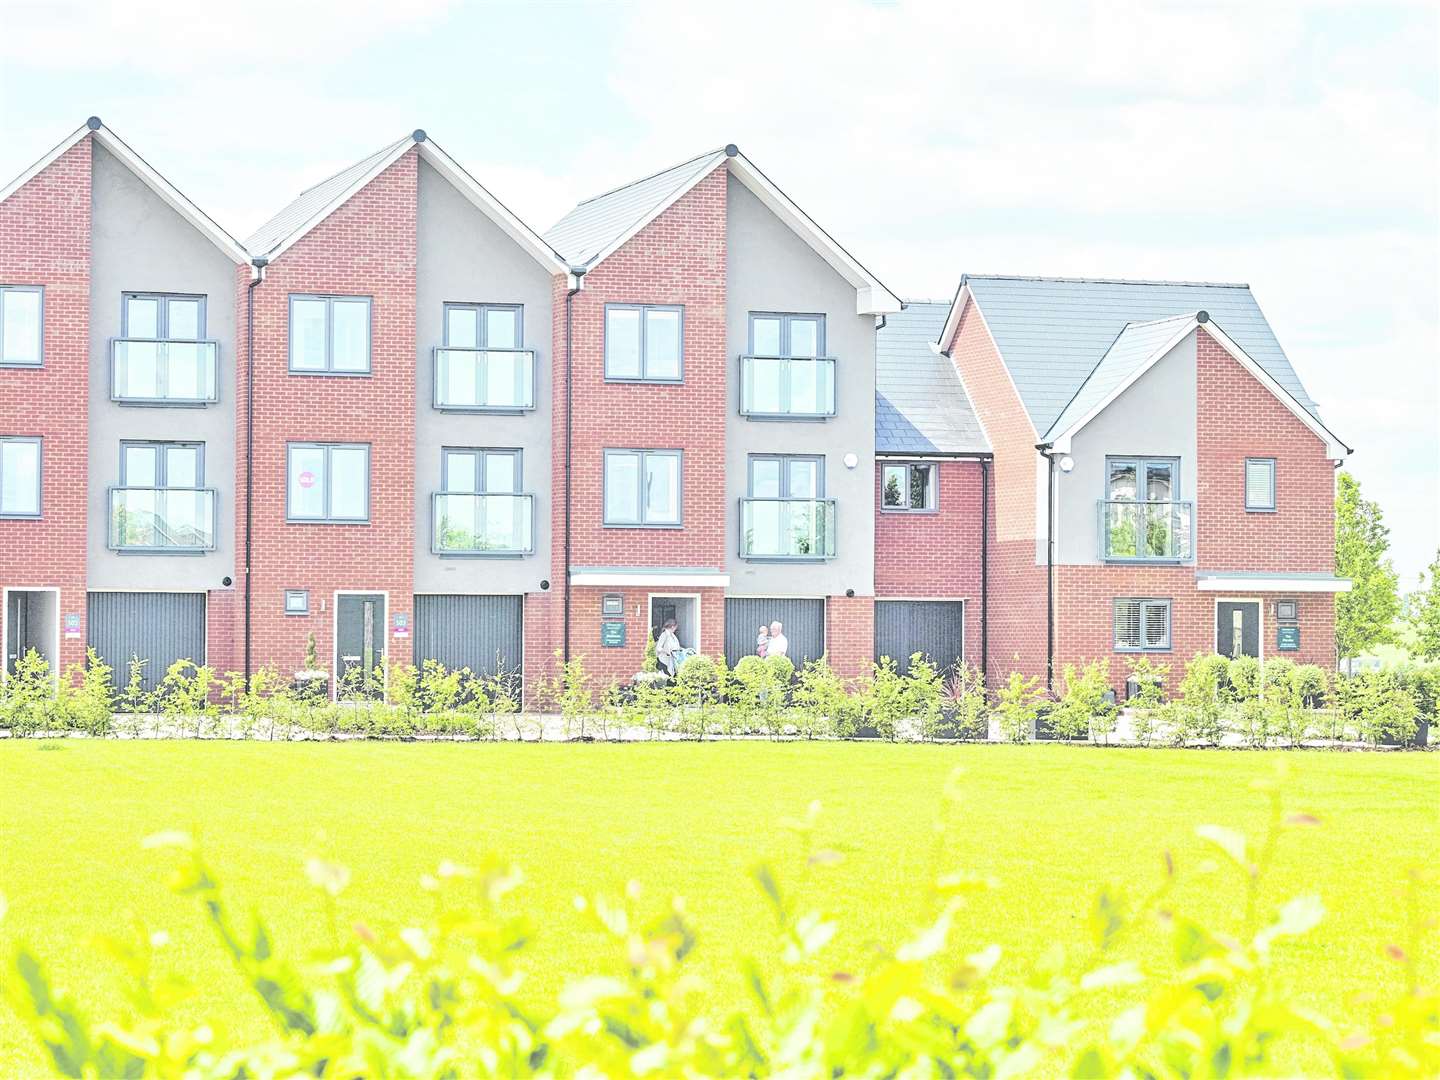 Homes built by Countryside at Springhead Park